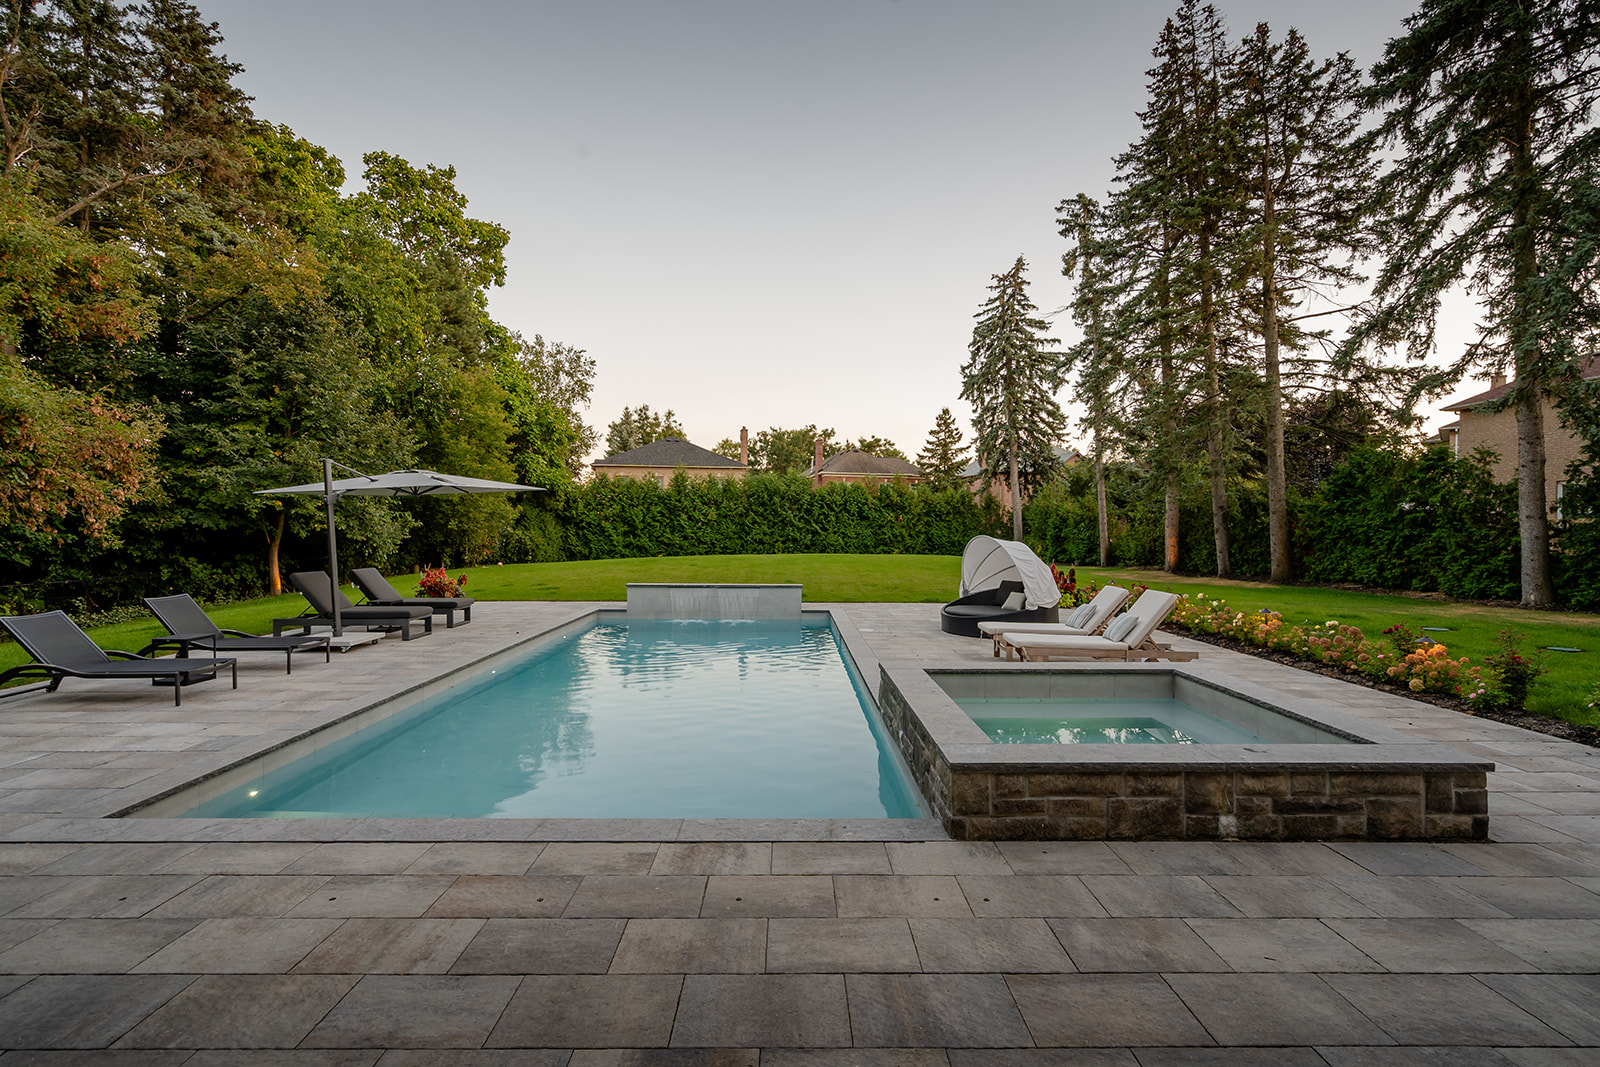 A backyard with an inground pool and the jacuzzi on the right.